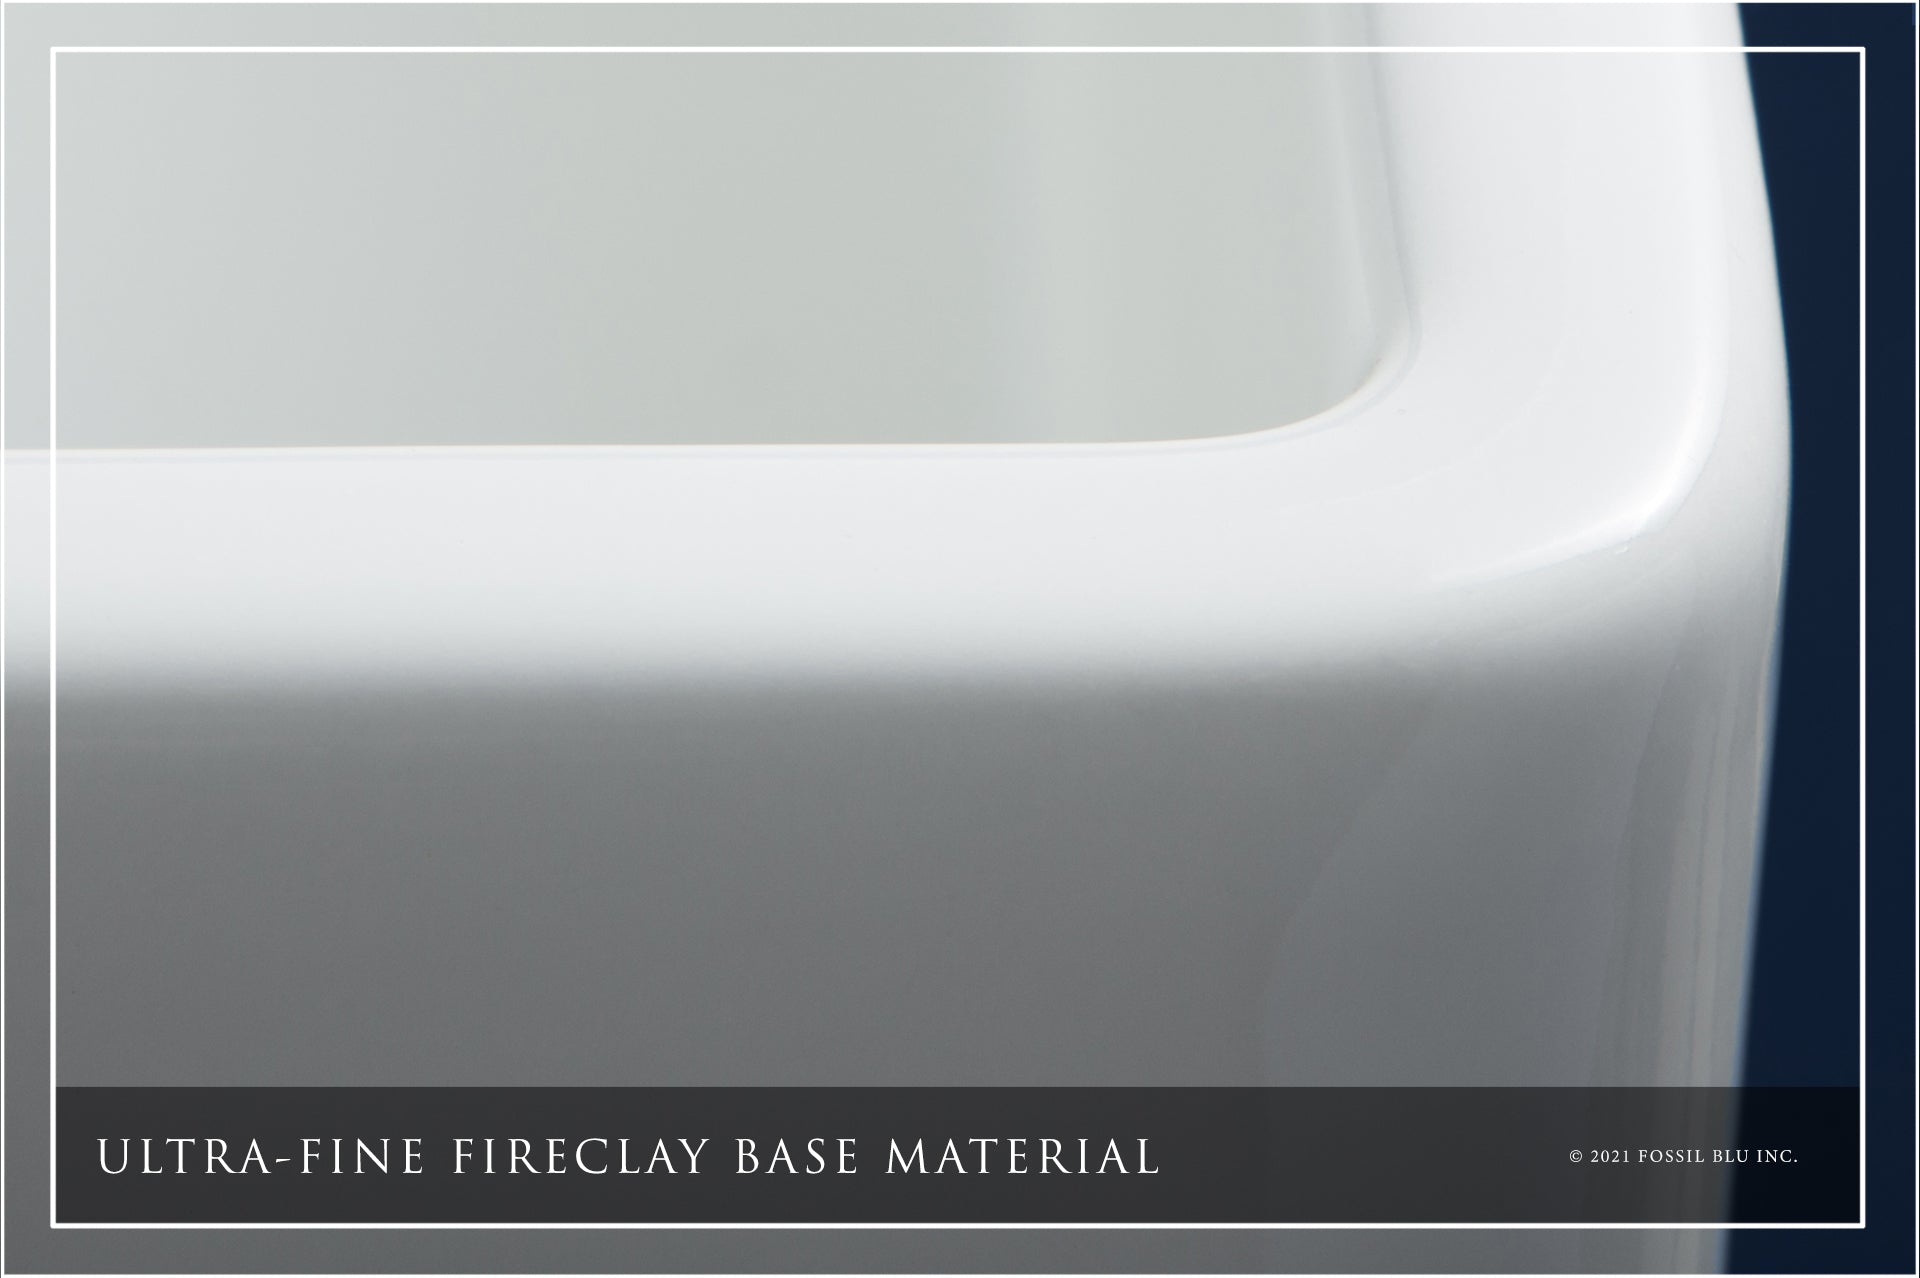 FSW1004BB LUXURY 30-INCH SOLID FIRECLAY FARMHOUSE SINK IN WHITE, MATTE GOLD ACCS, BELTED FRONT